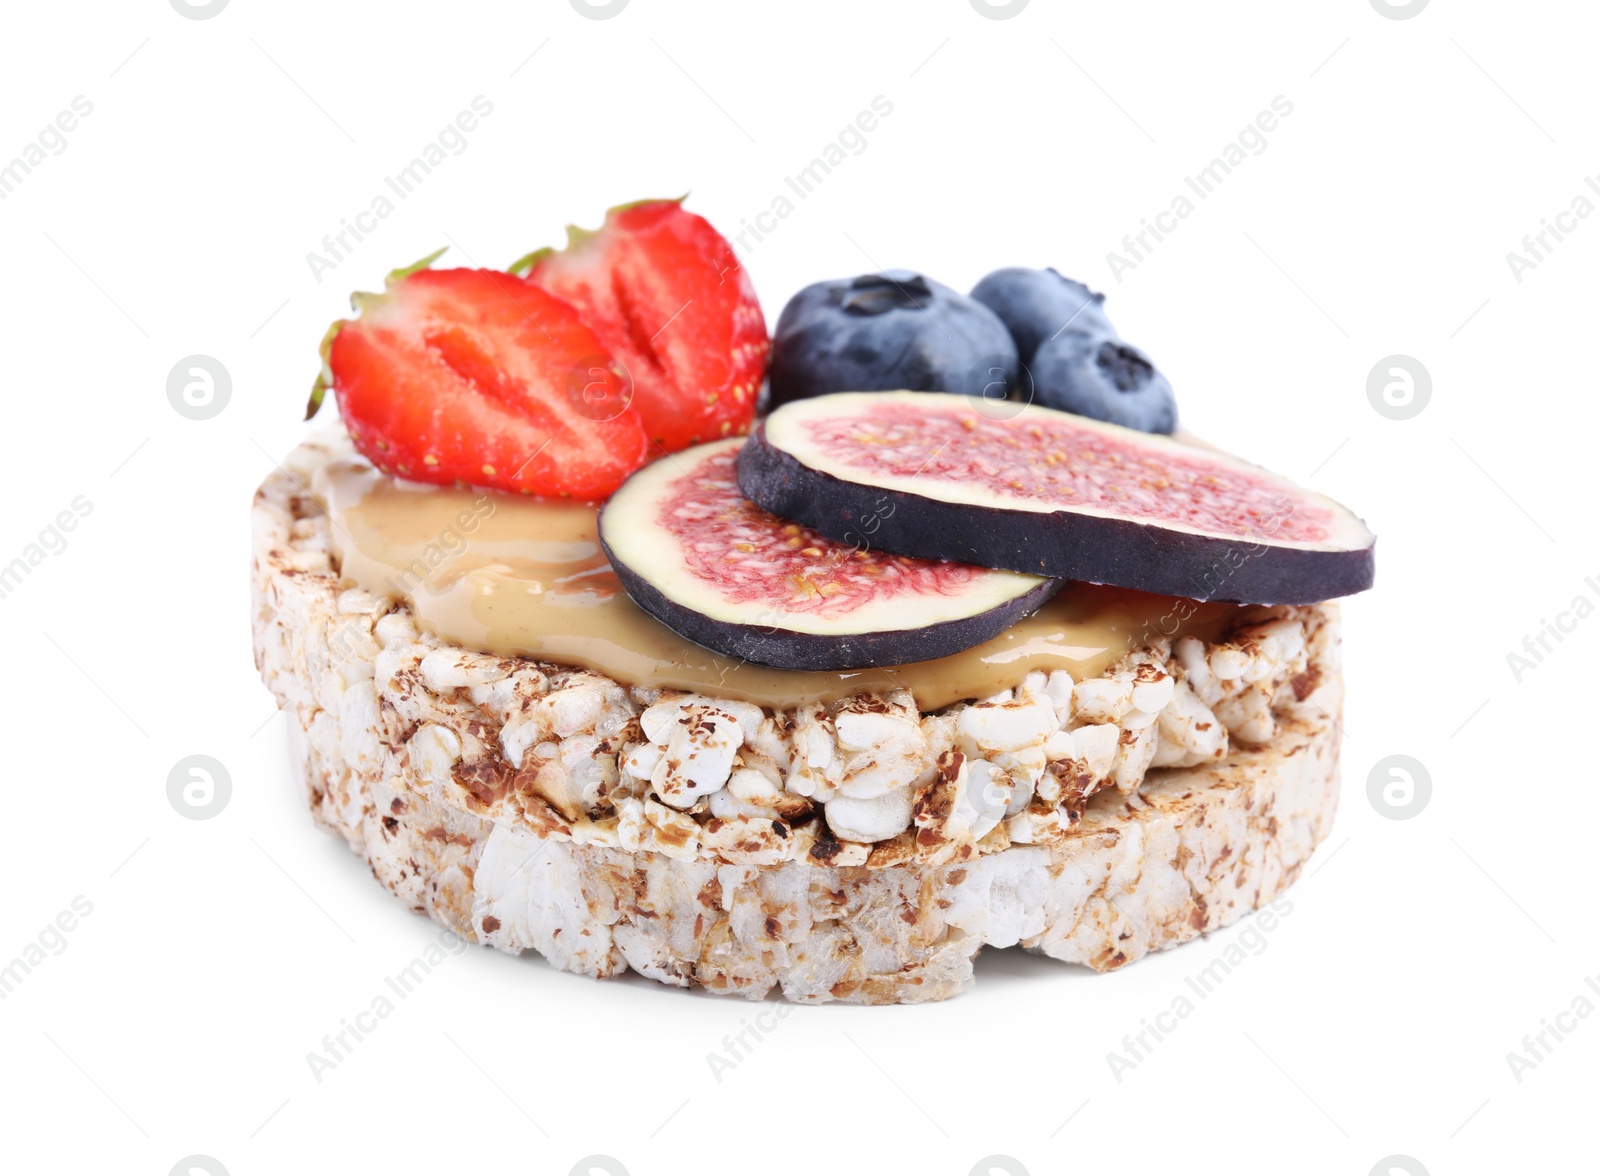 Photo of Tasty crispbread with peanut butter, berries and figs on white background